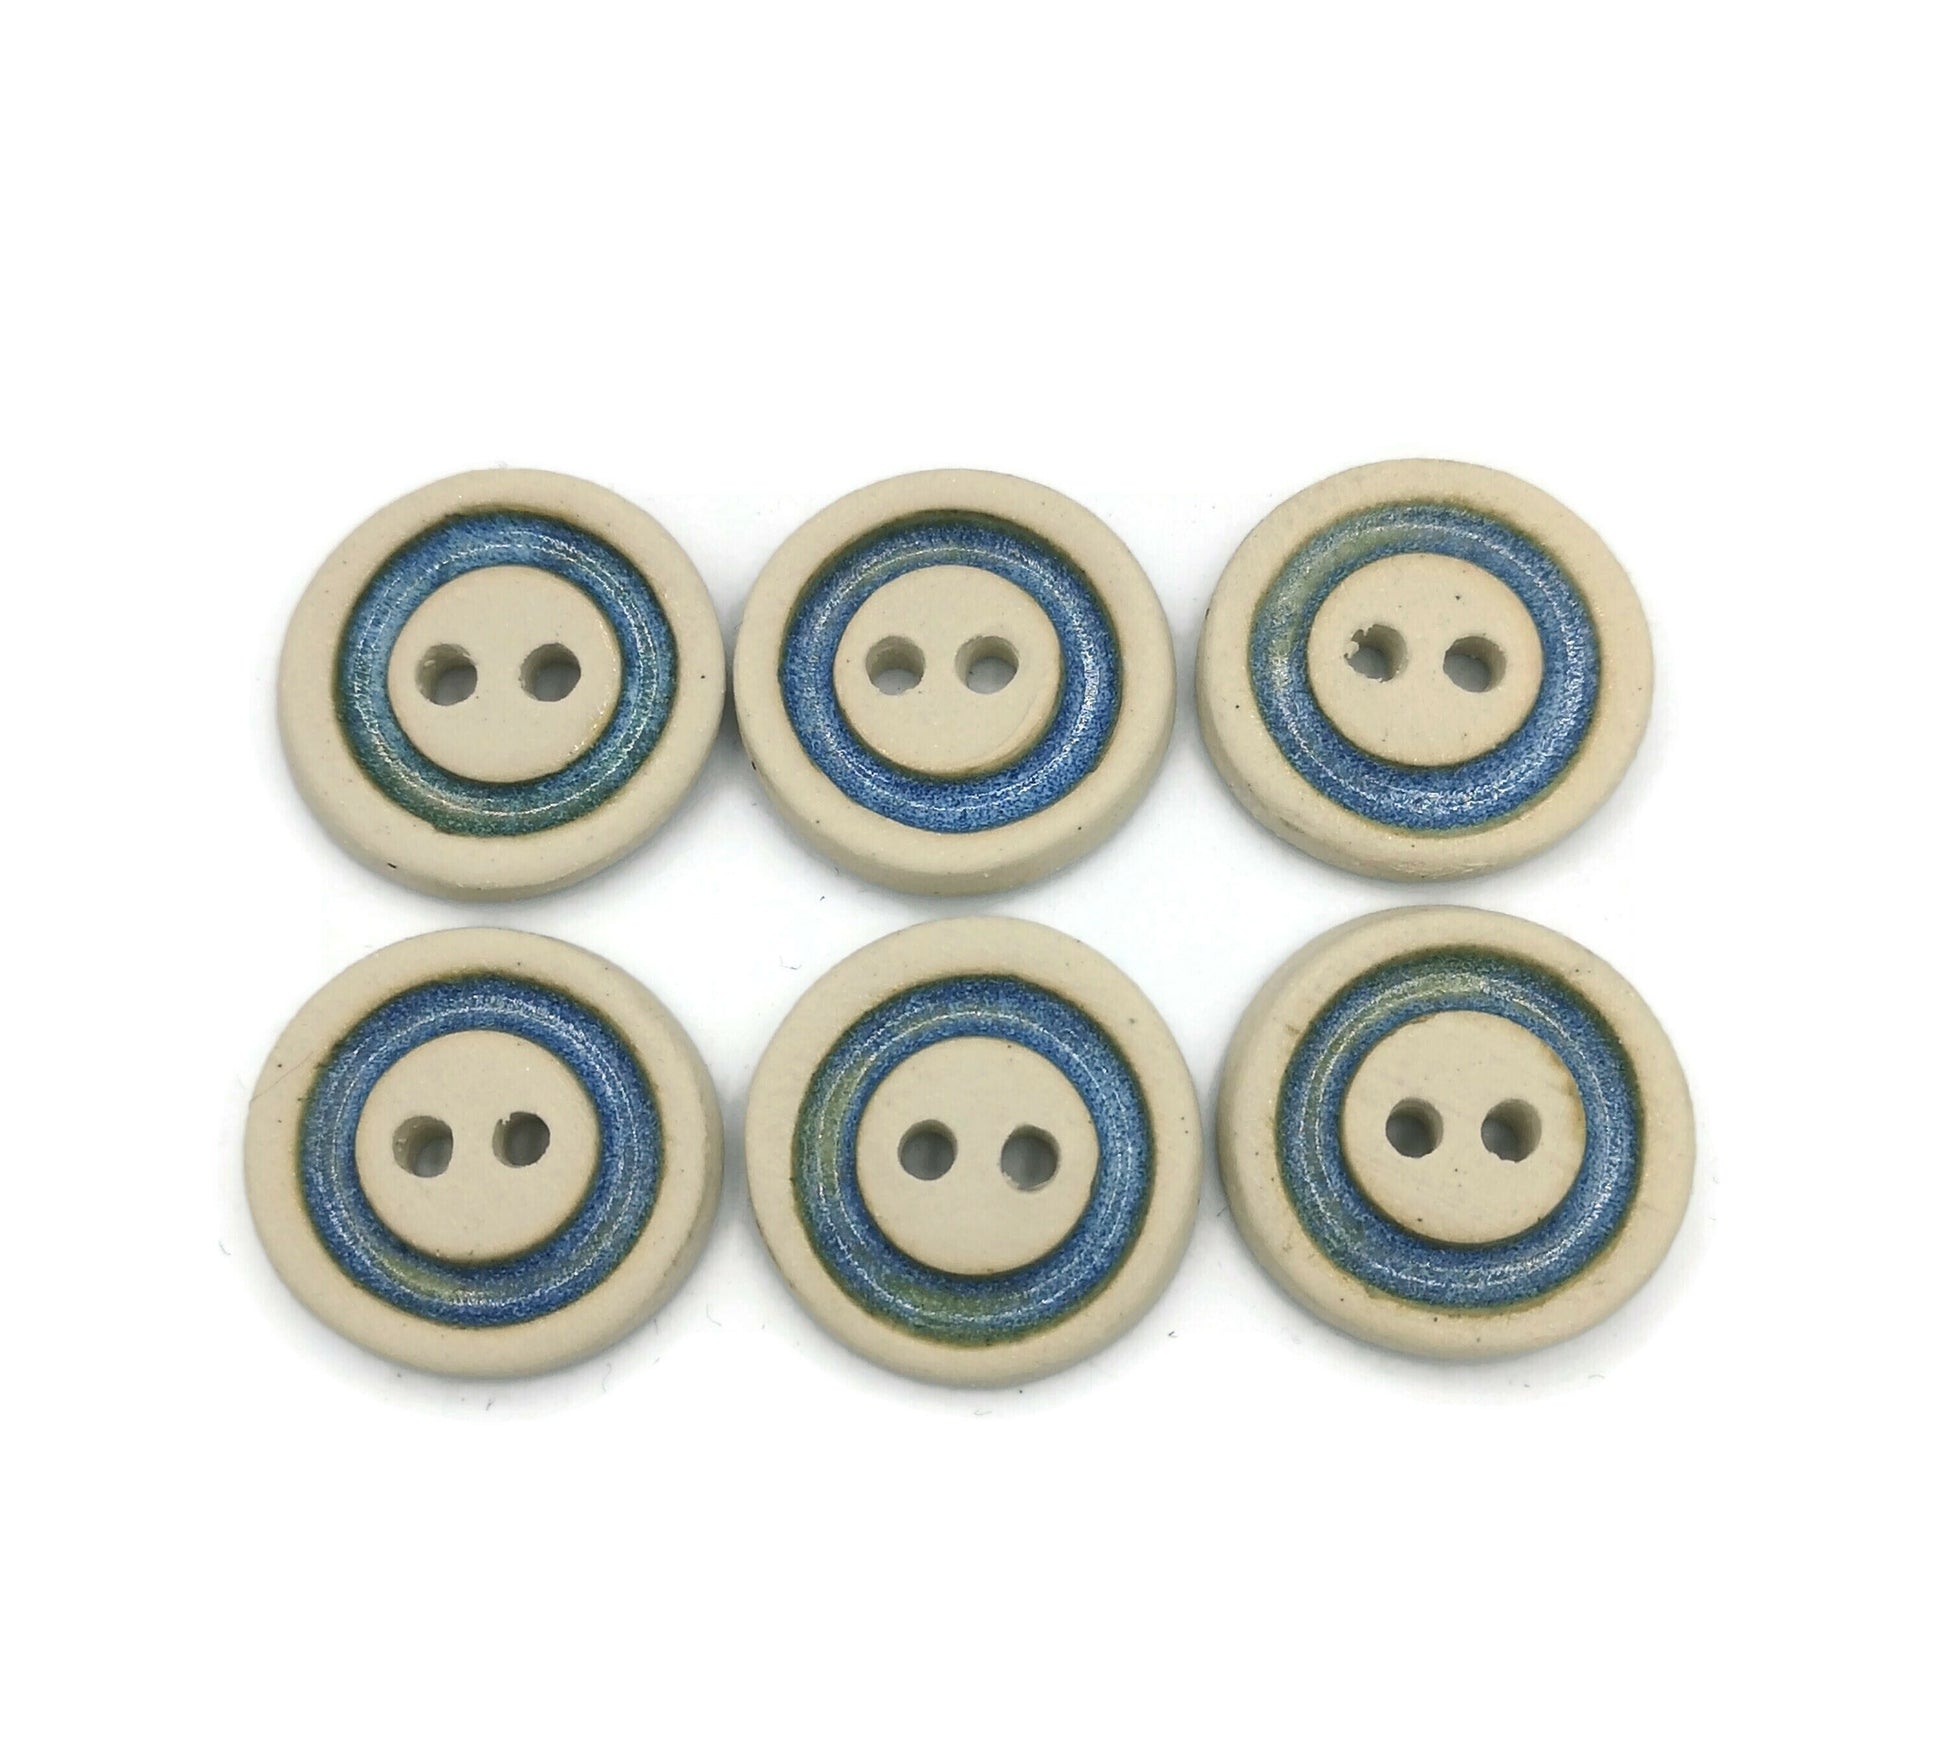 6Pc 25mm/1in Handmade Ceramic Sewing Buttons, Matte Beige With Glossy Blue Accent, Novelty Clay Buttons For Crafts, Unique Pottery Buttons - Ceramica Ana Rafael